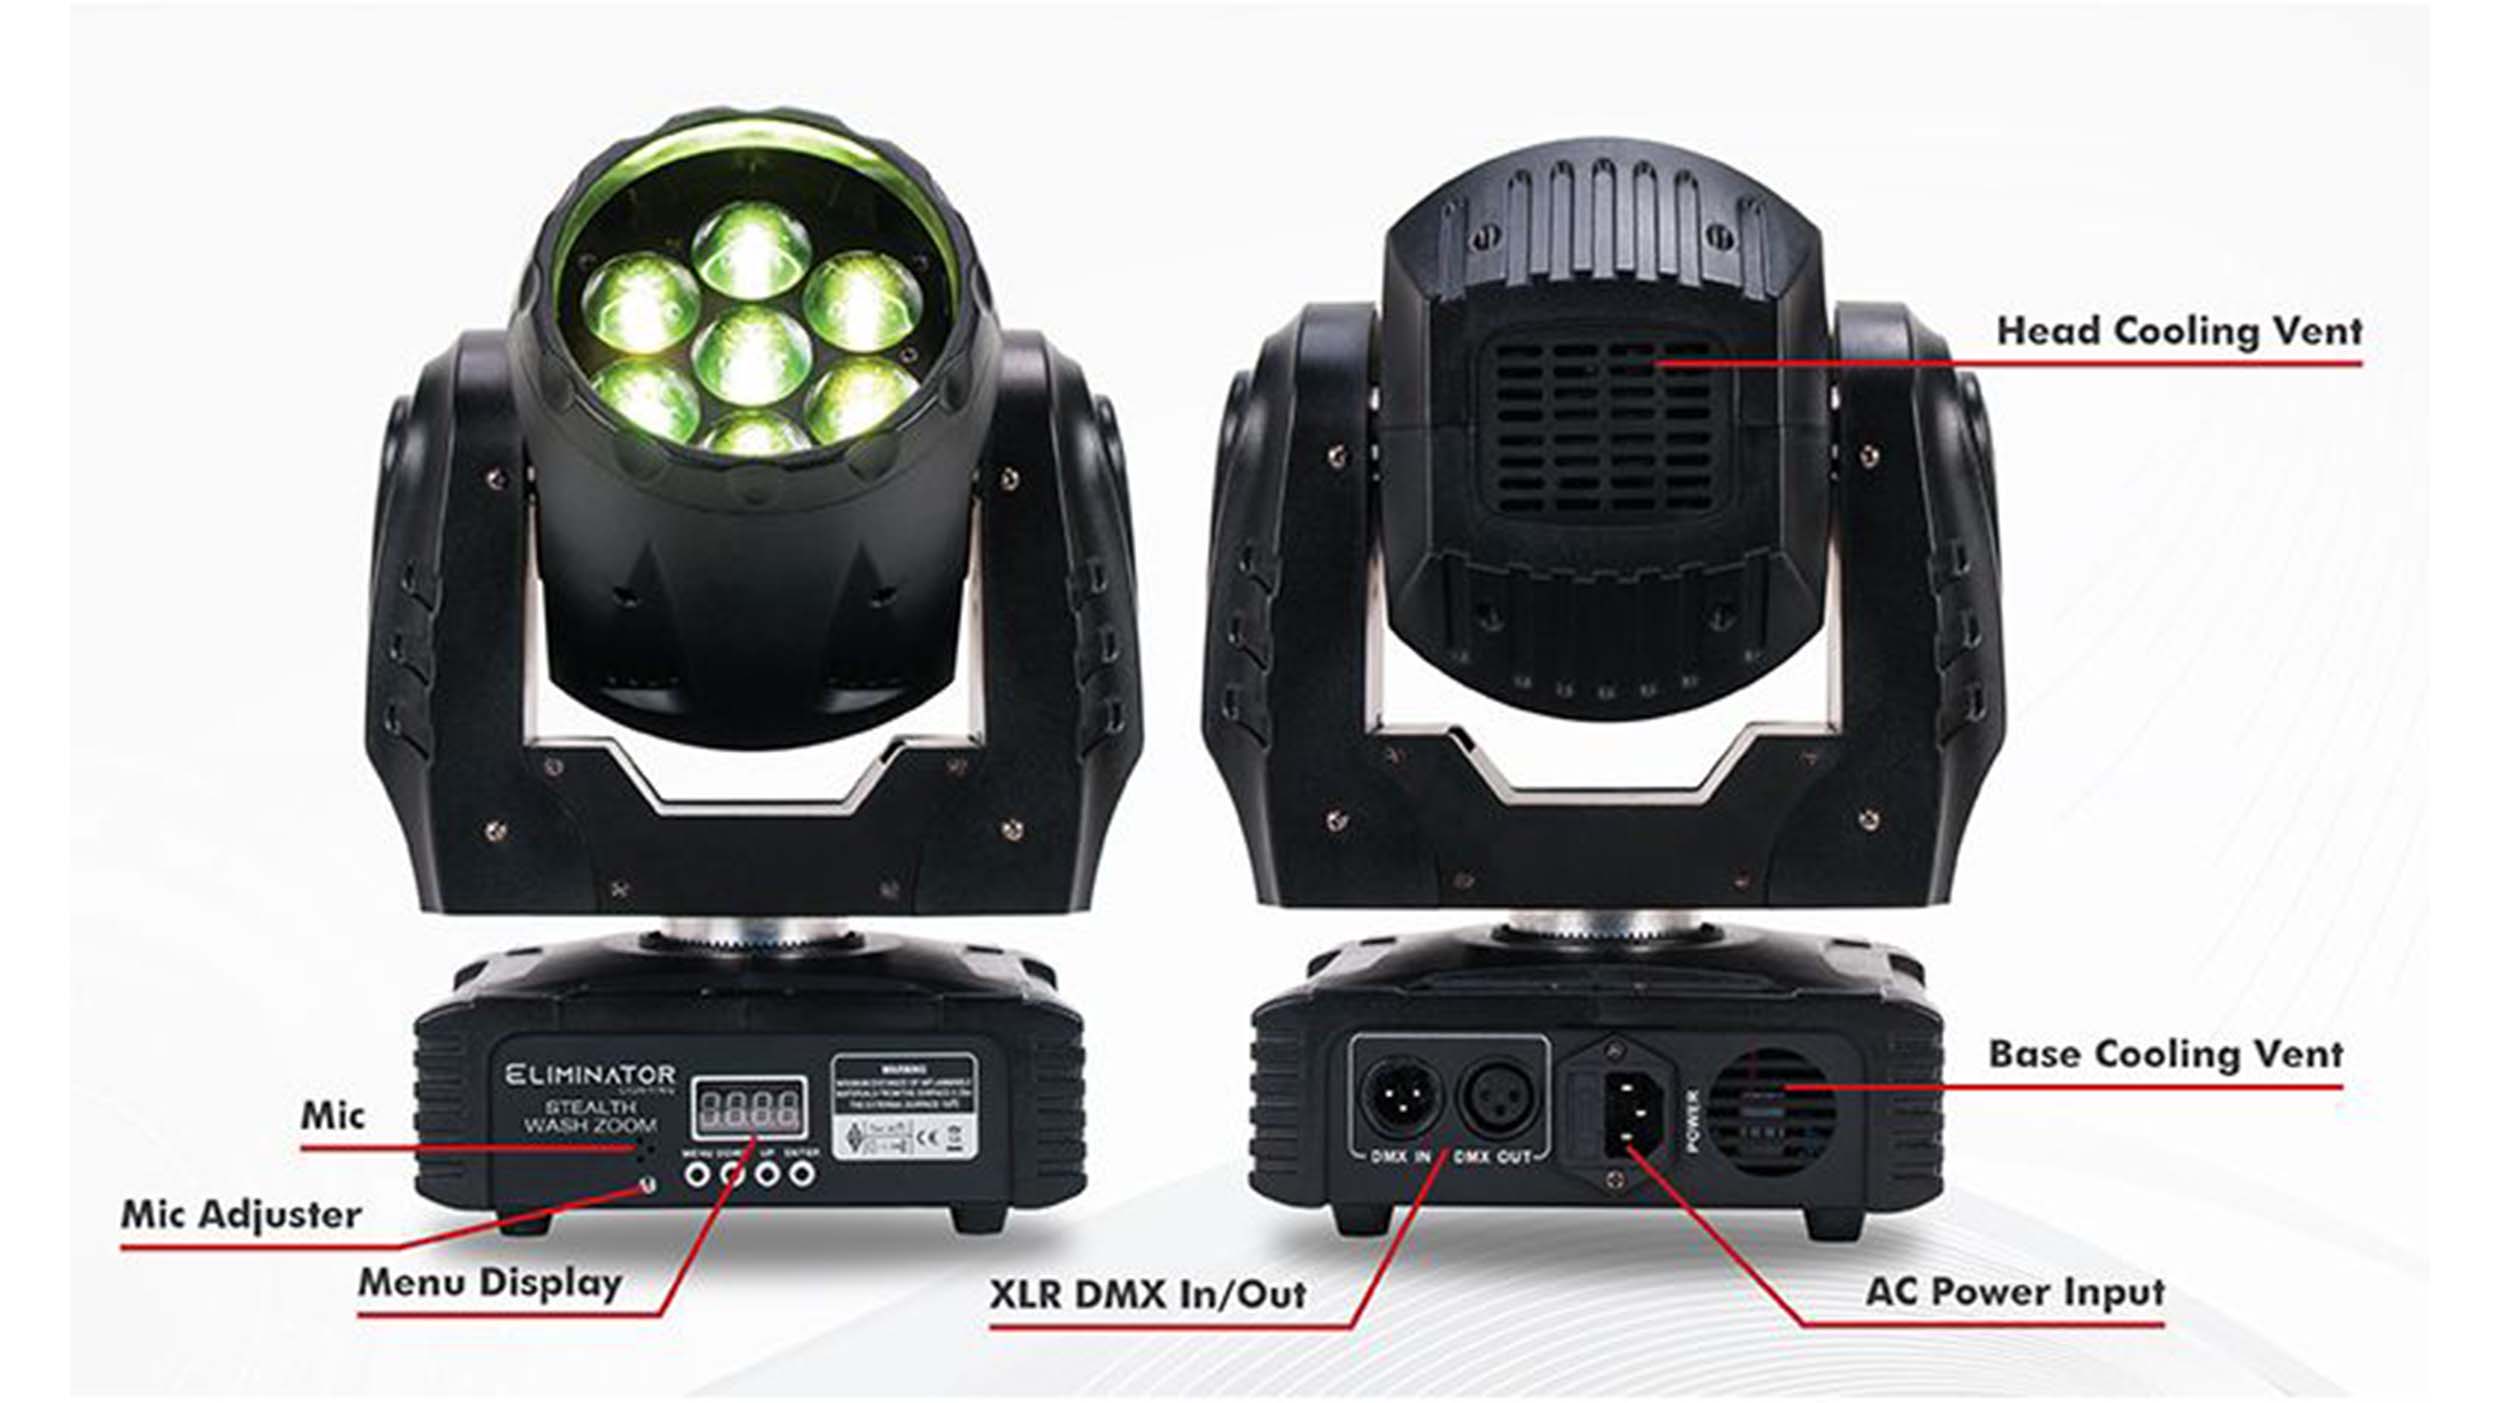 Eliminator Lighting Stealth Wash Zoom, Compact Wash Moving Head with Motorized Zoom and RGBW LEDs - 12 Watt by Eliminator Lighting